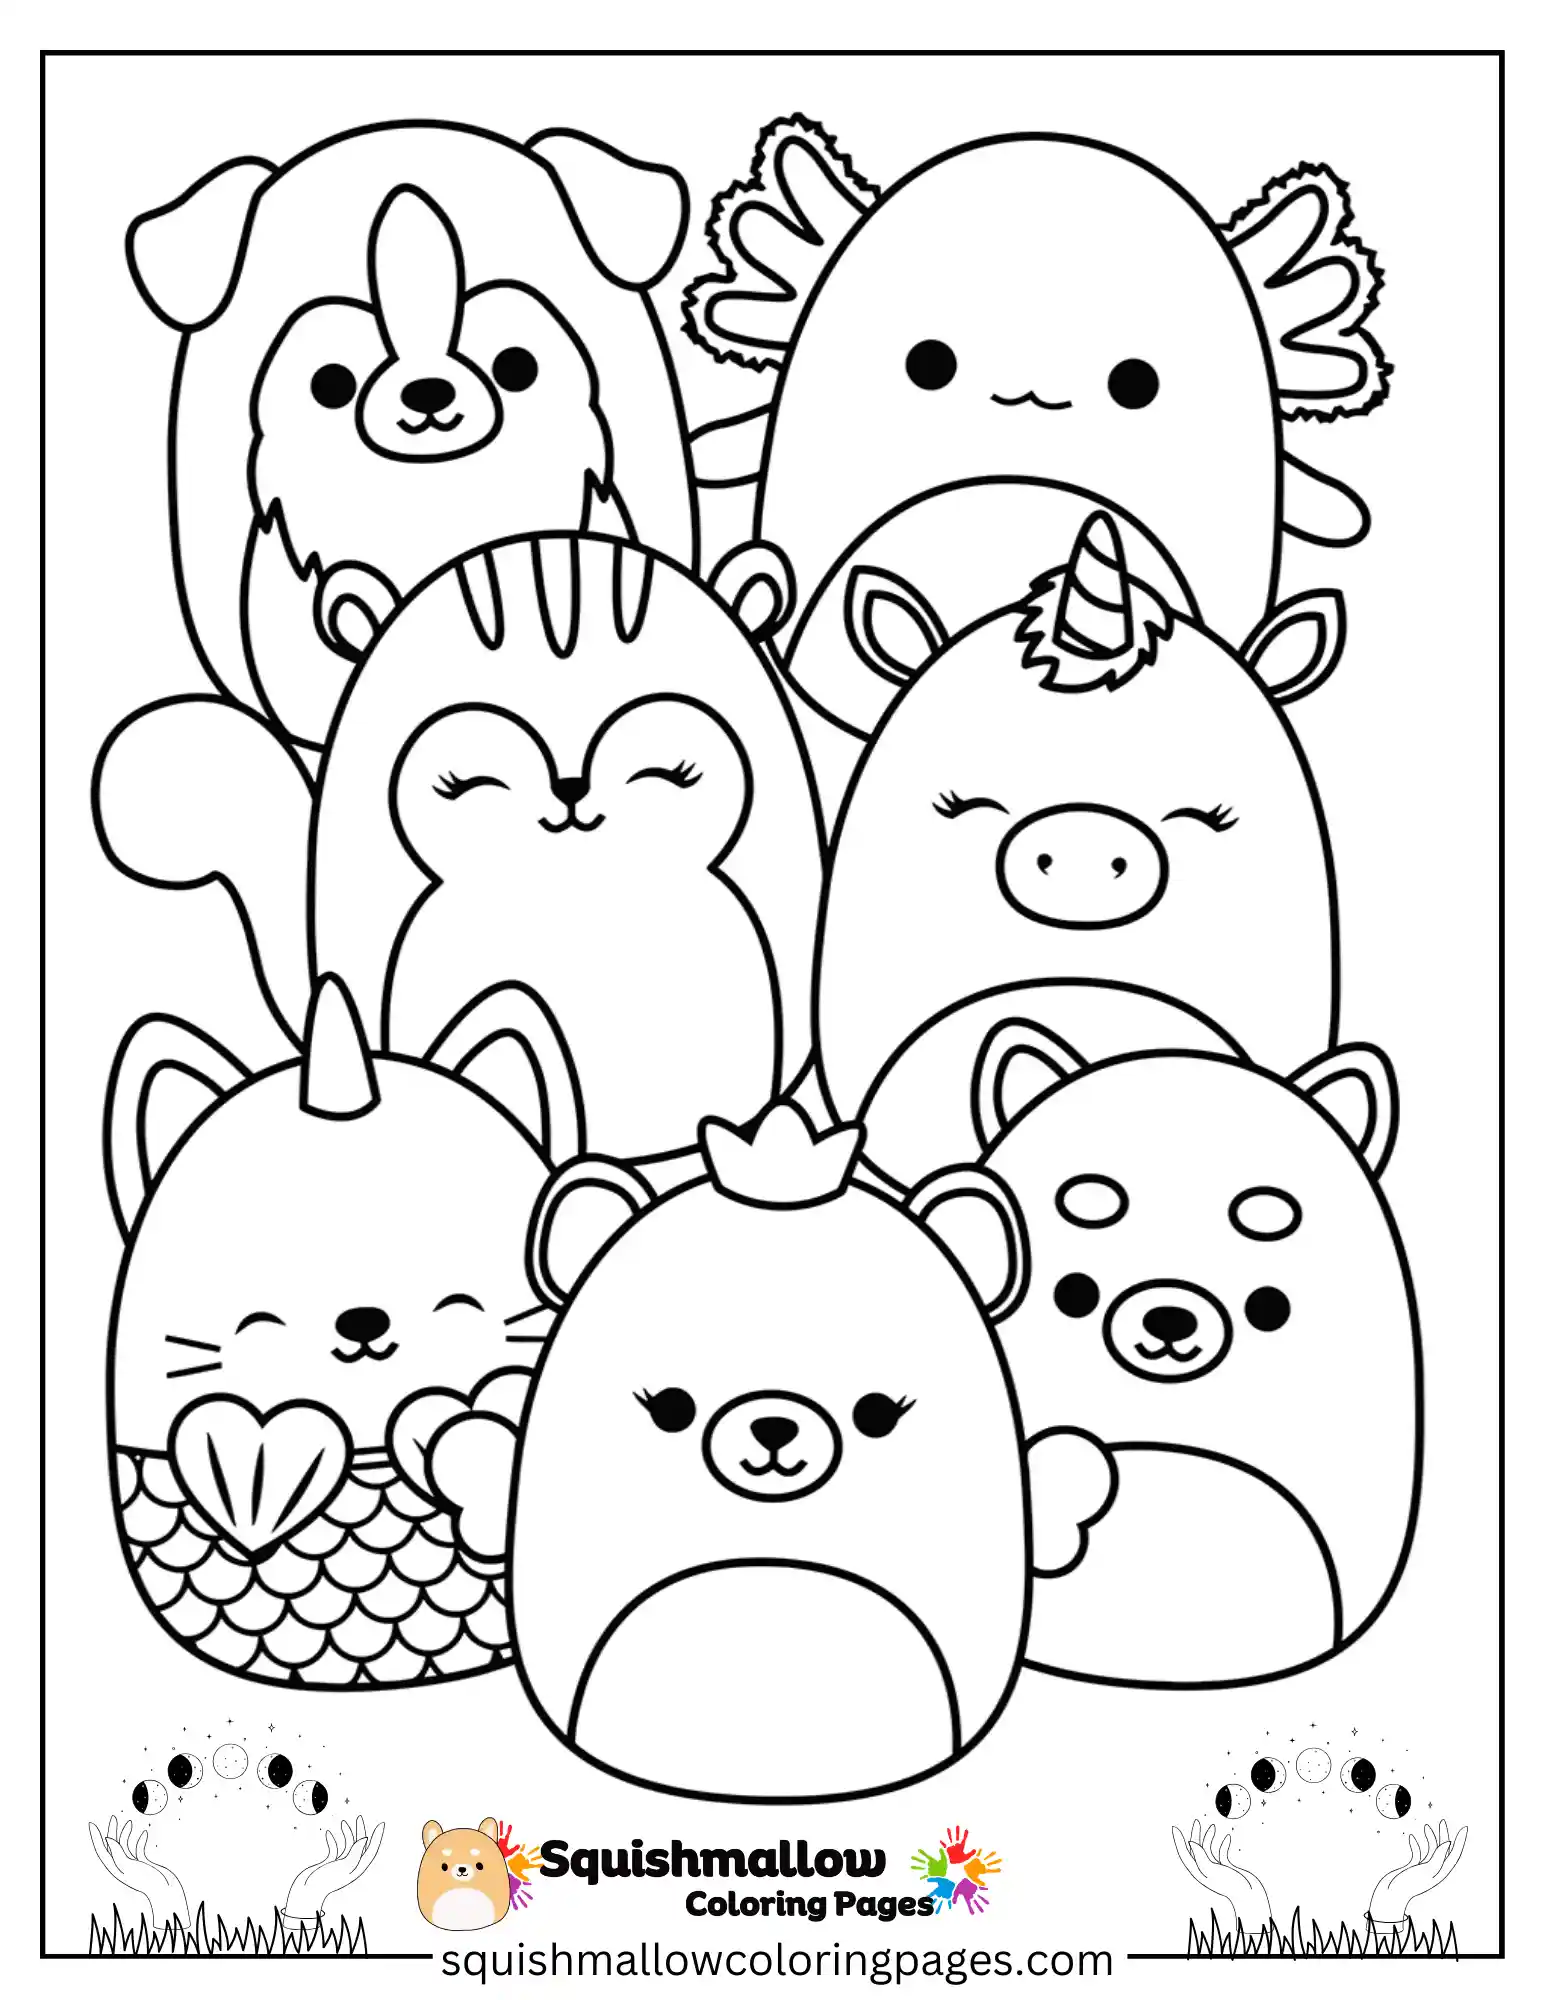 Many Cute Squishmallows Coloring Pages